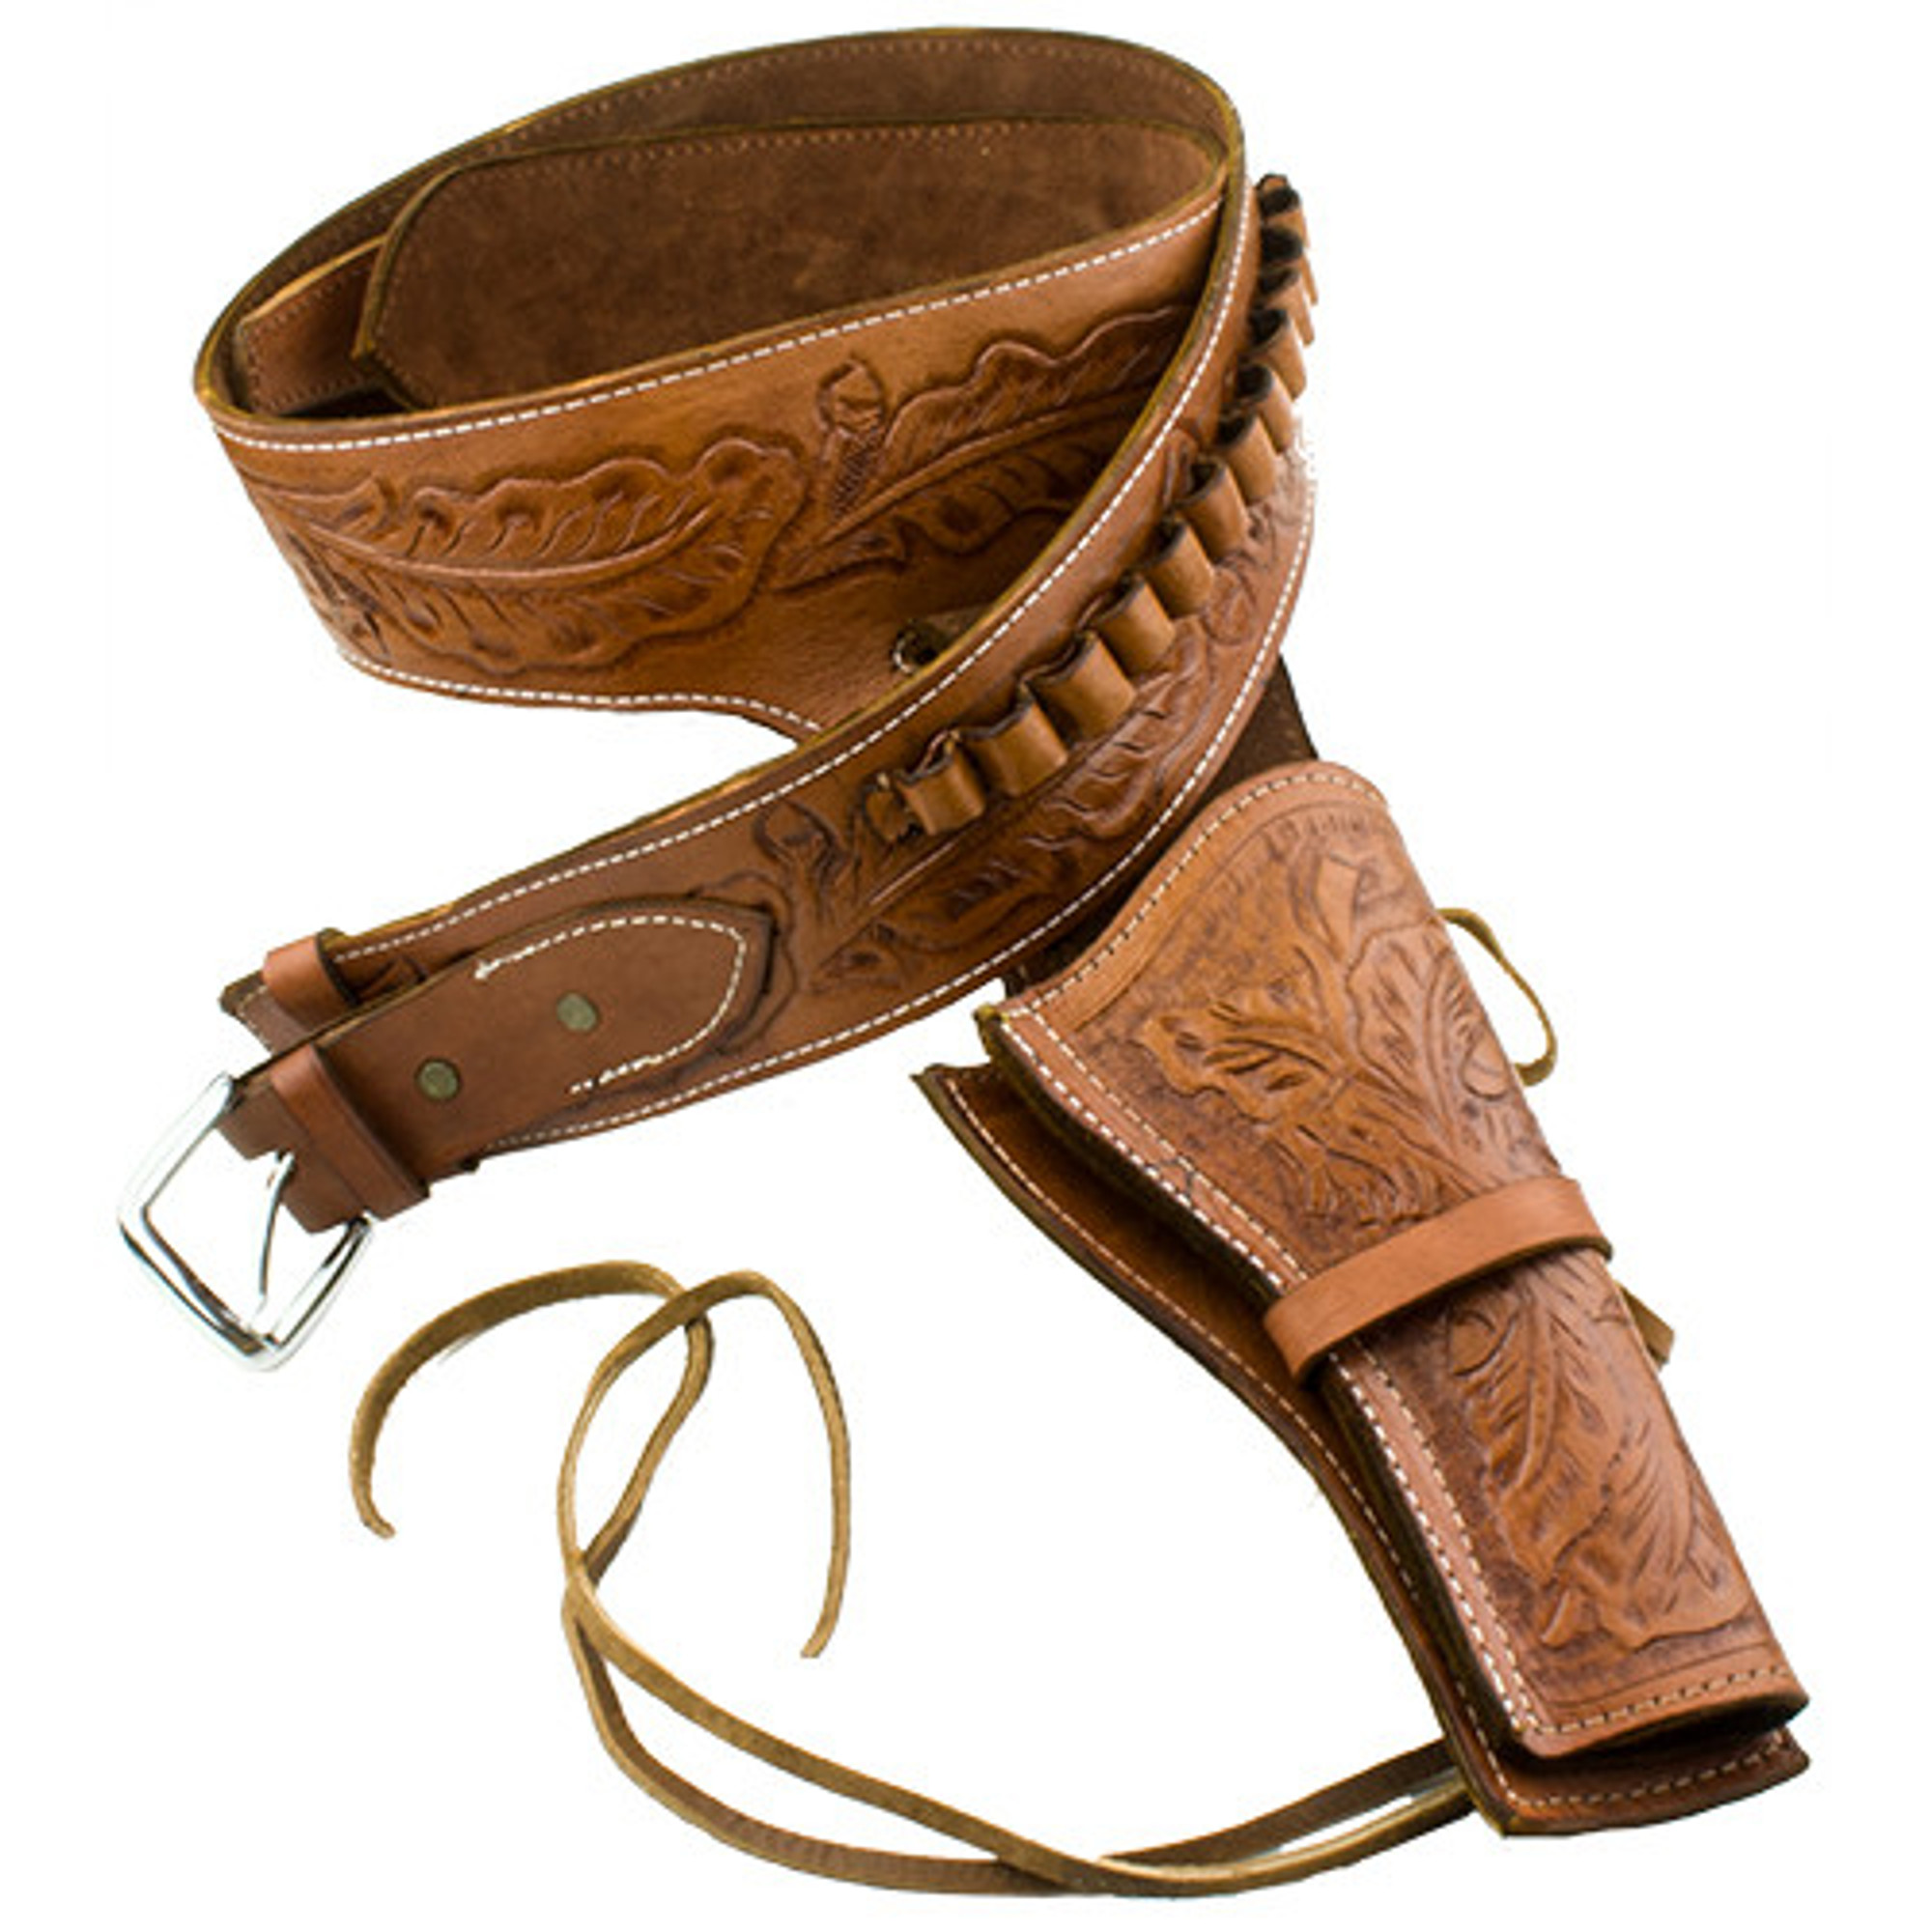 Deluxe Tooled Tan Leather Western Holster